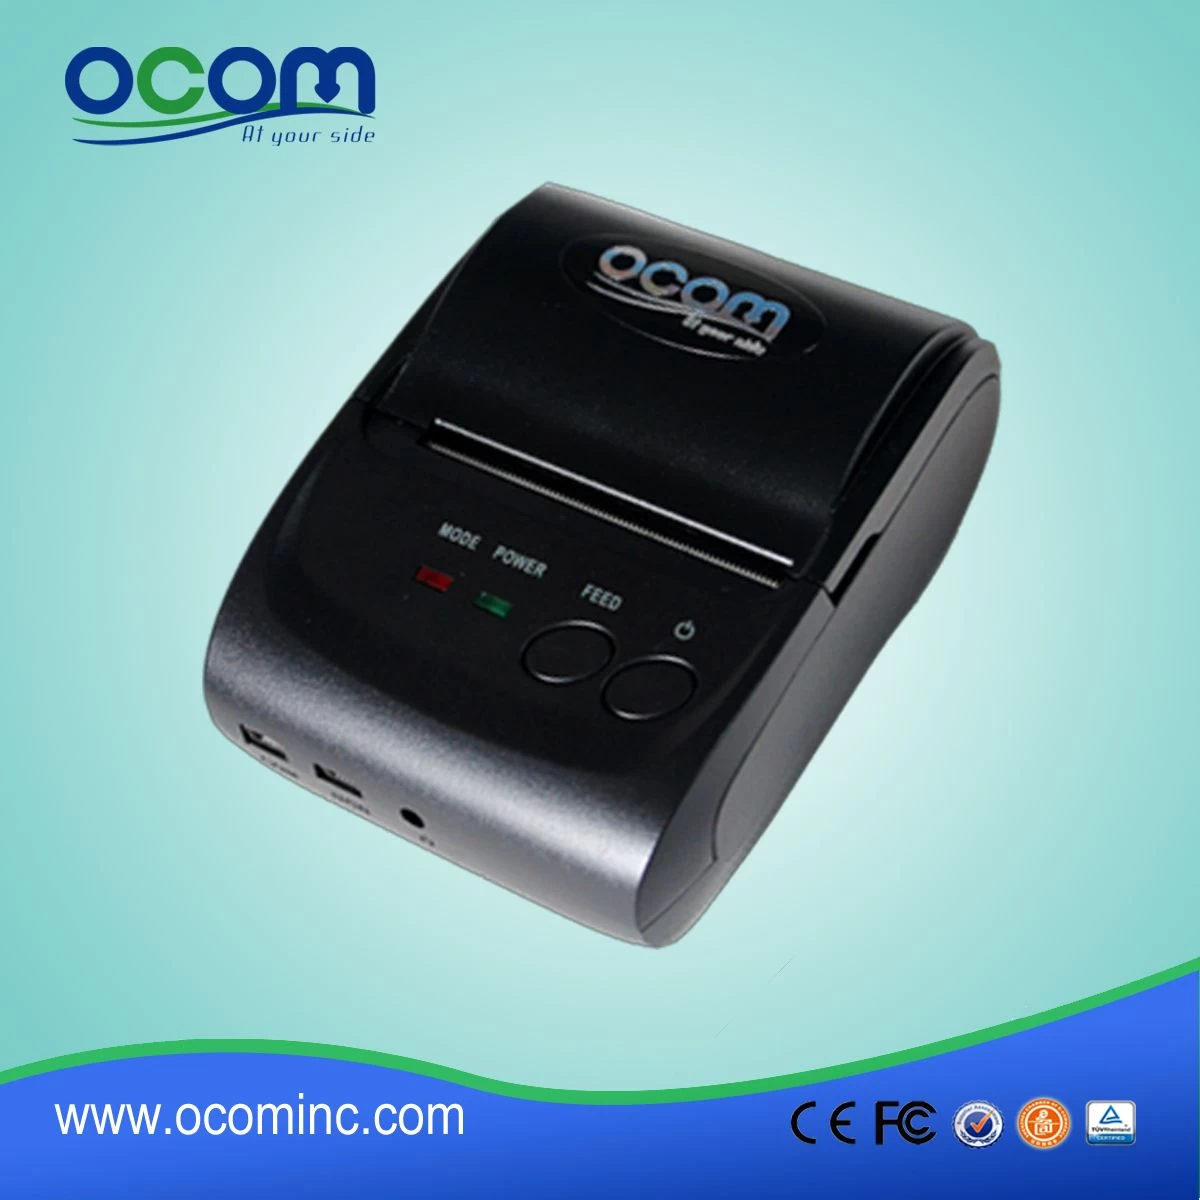 Portable Bluetooth Mobile POS Thermal Printer support smartphone